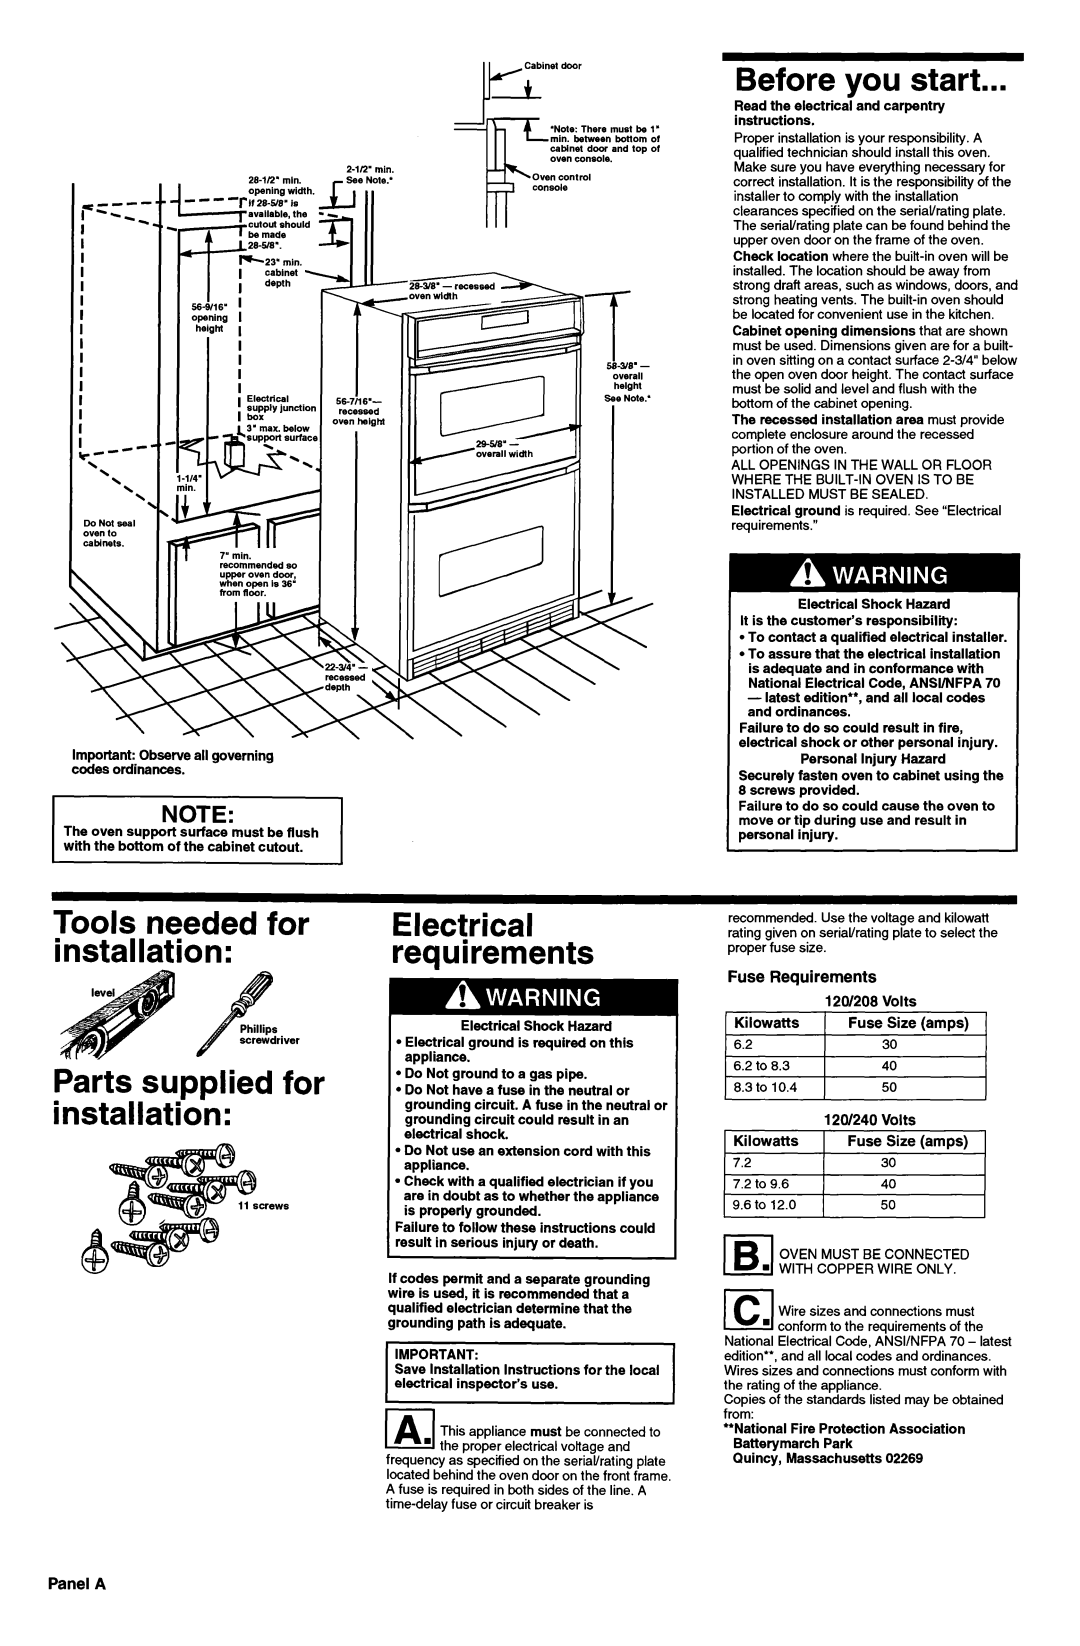 KitchenAid 3187359 Before you start, Tools needed for installation Parts supplied for installation, 5dn6’, Panel A, Volts 